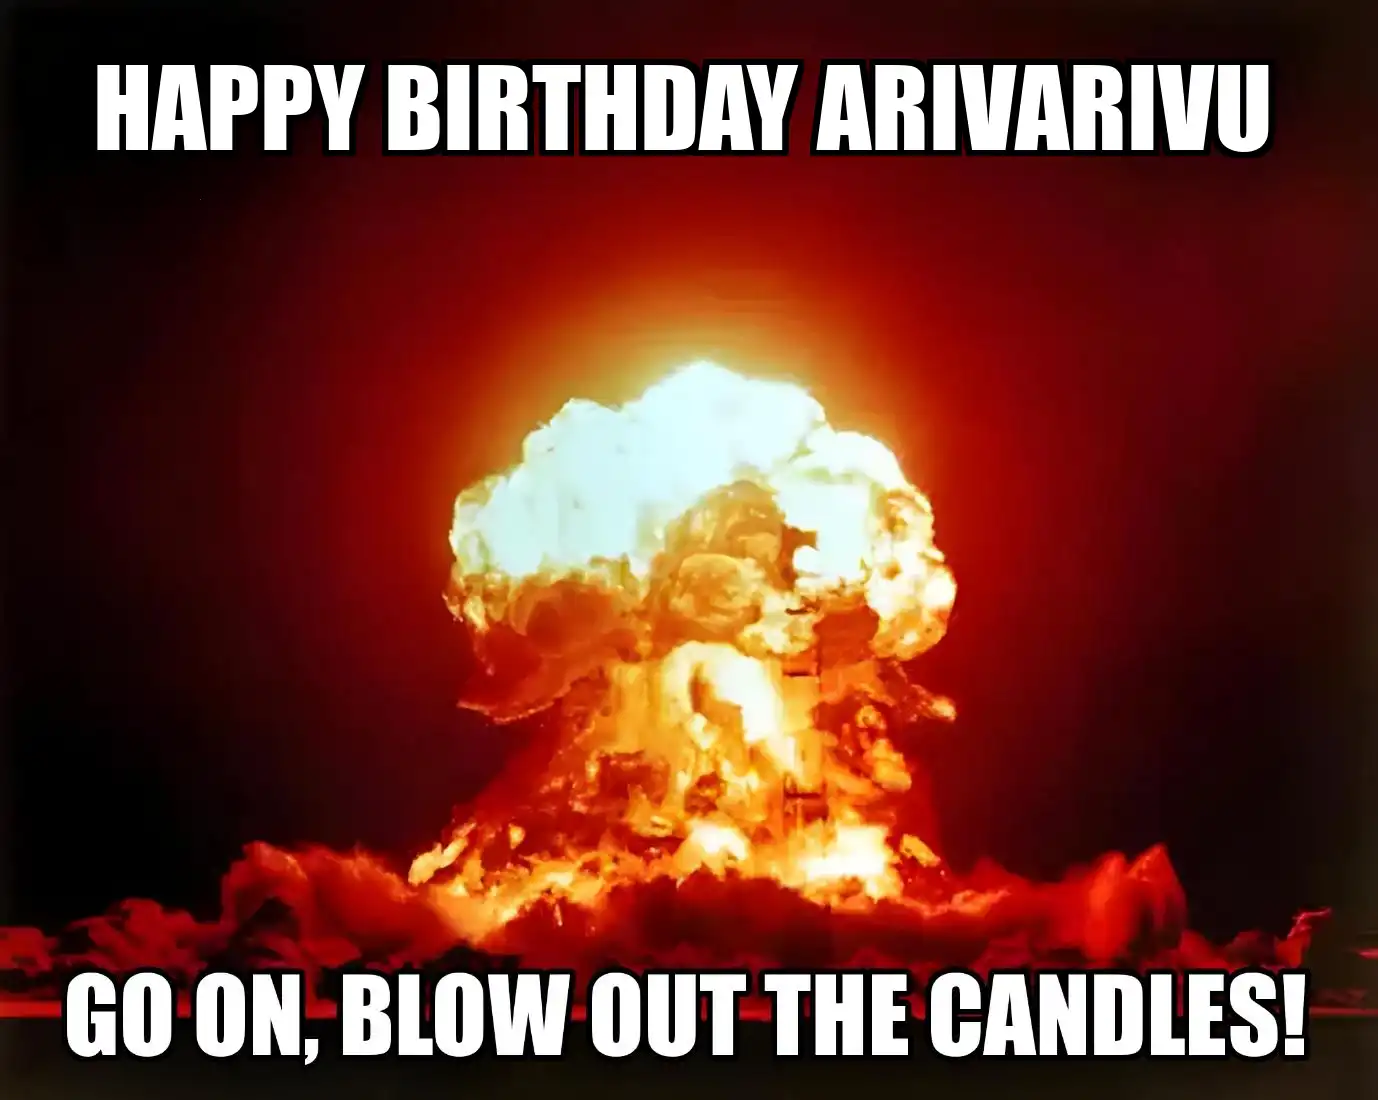 Happy Birthday Arivarivu Go On Blow Out The Candles Meme